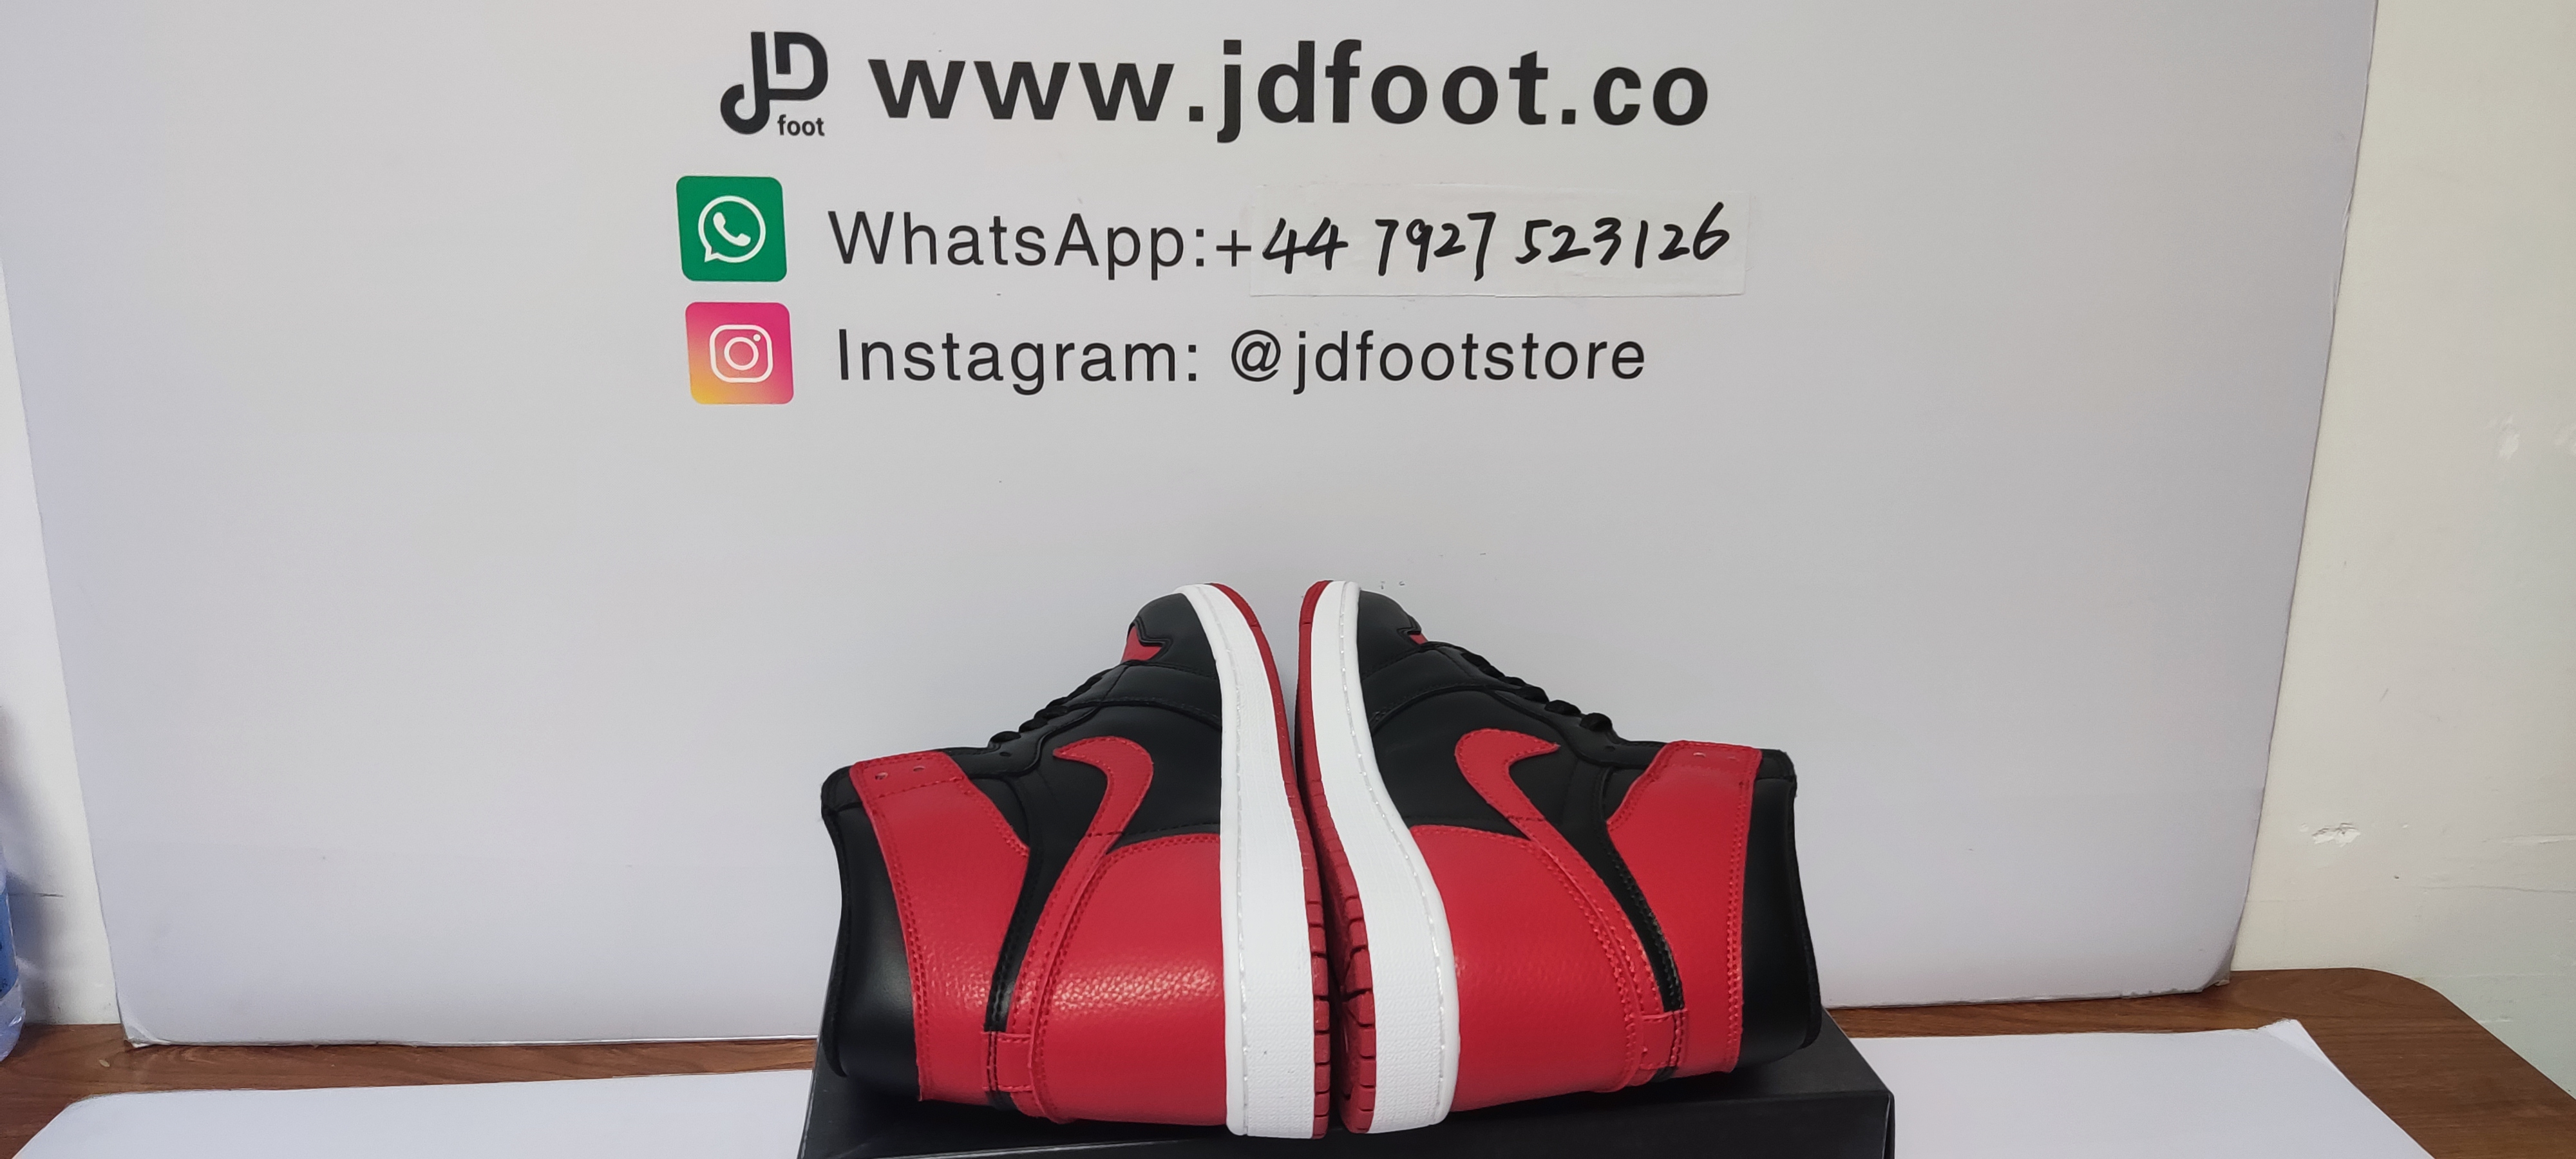 QC Picture Replica Jordan 1 Retro Bred Banned From Jdfoot